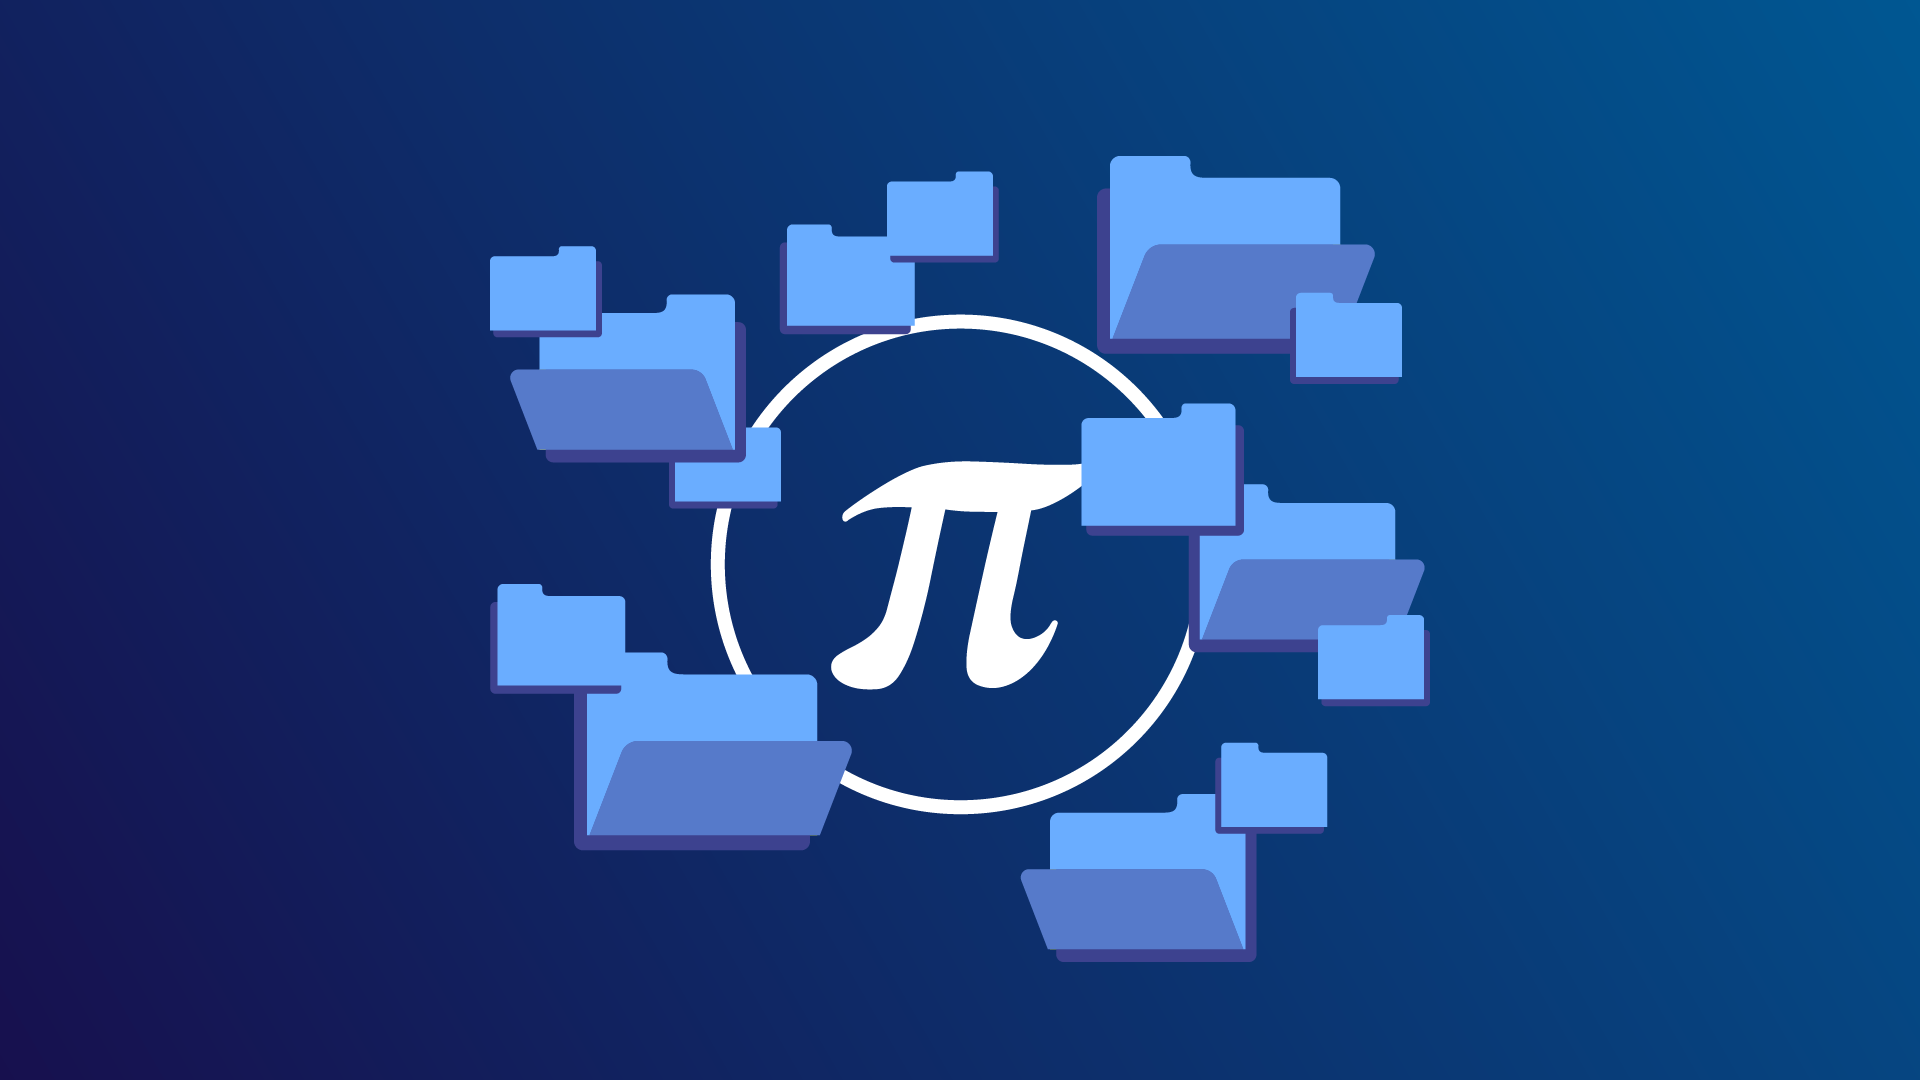 A Pi symbol in white against a blue background with folders floating all around it.